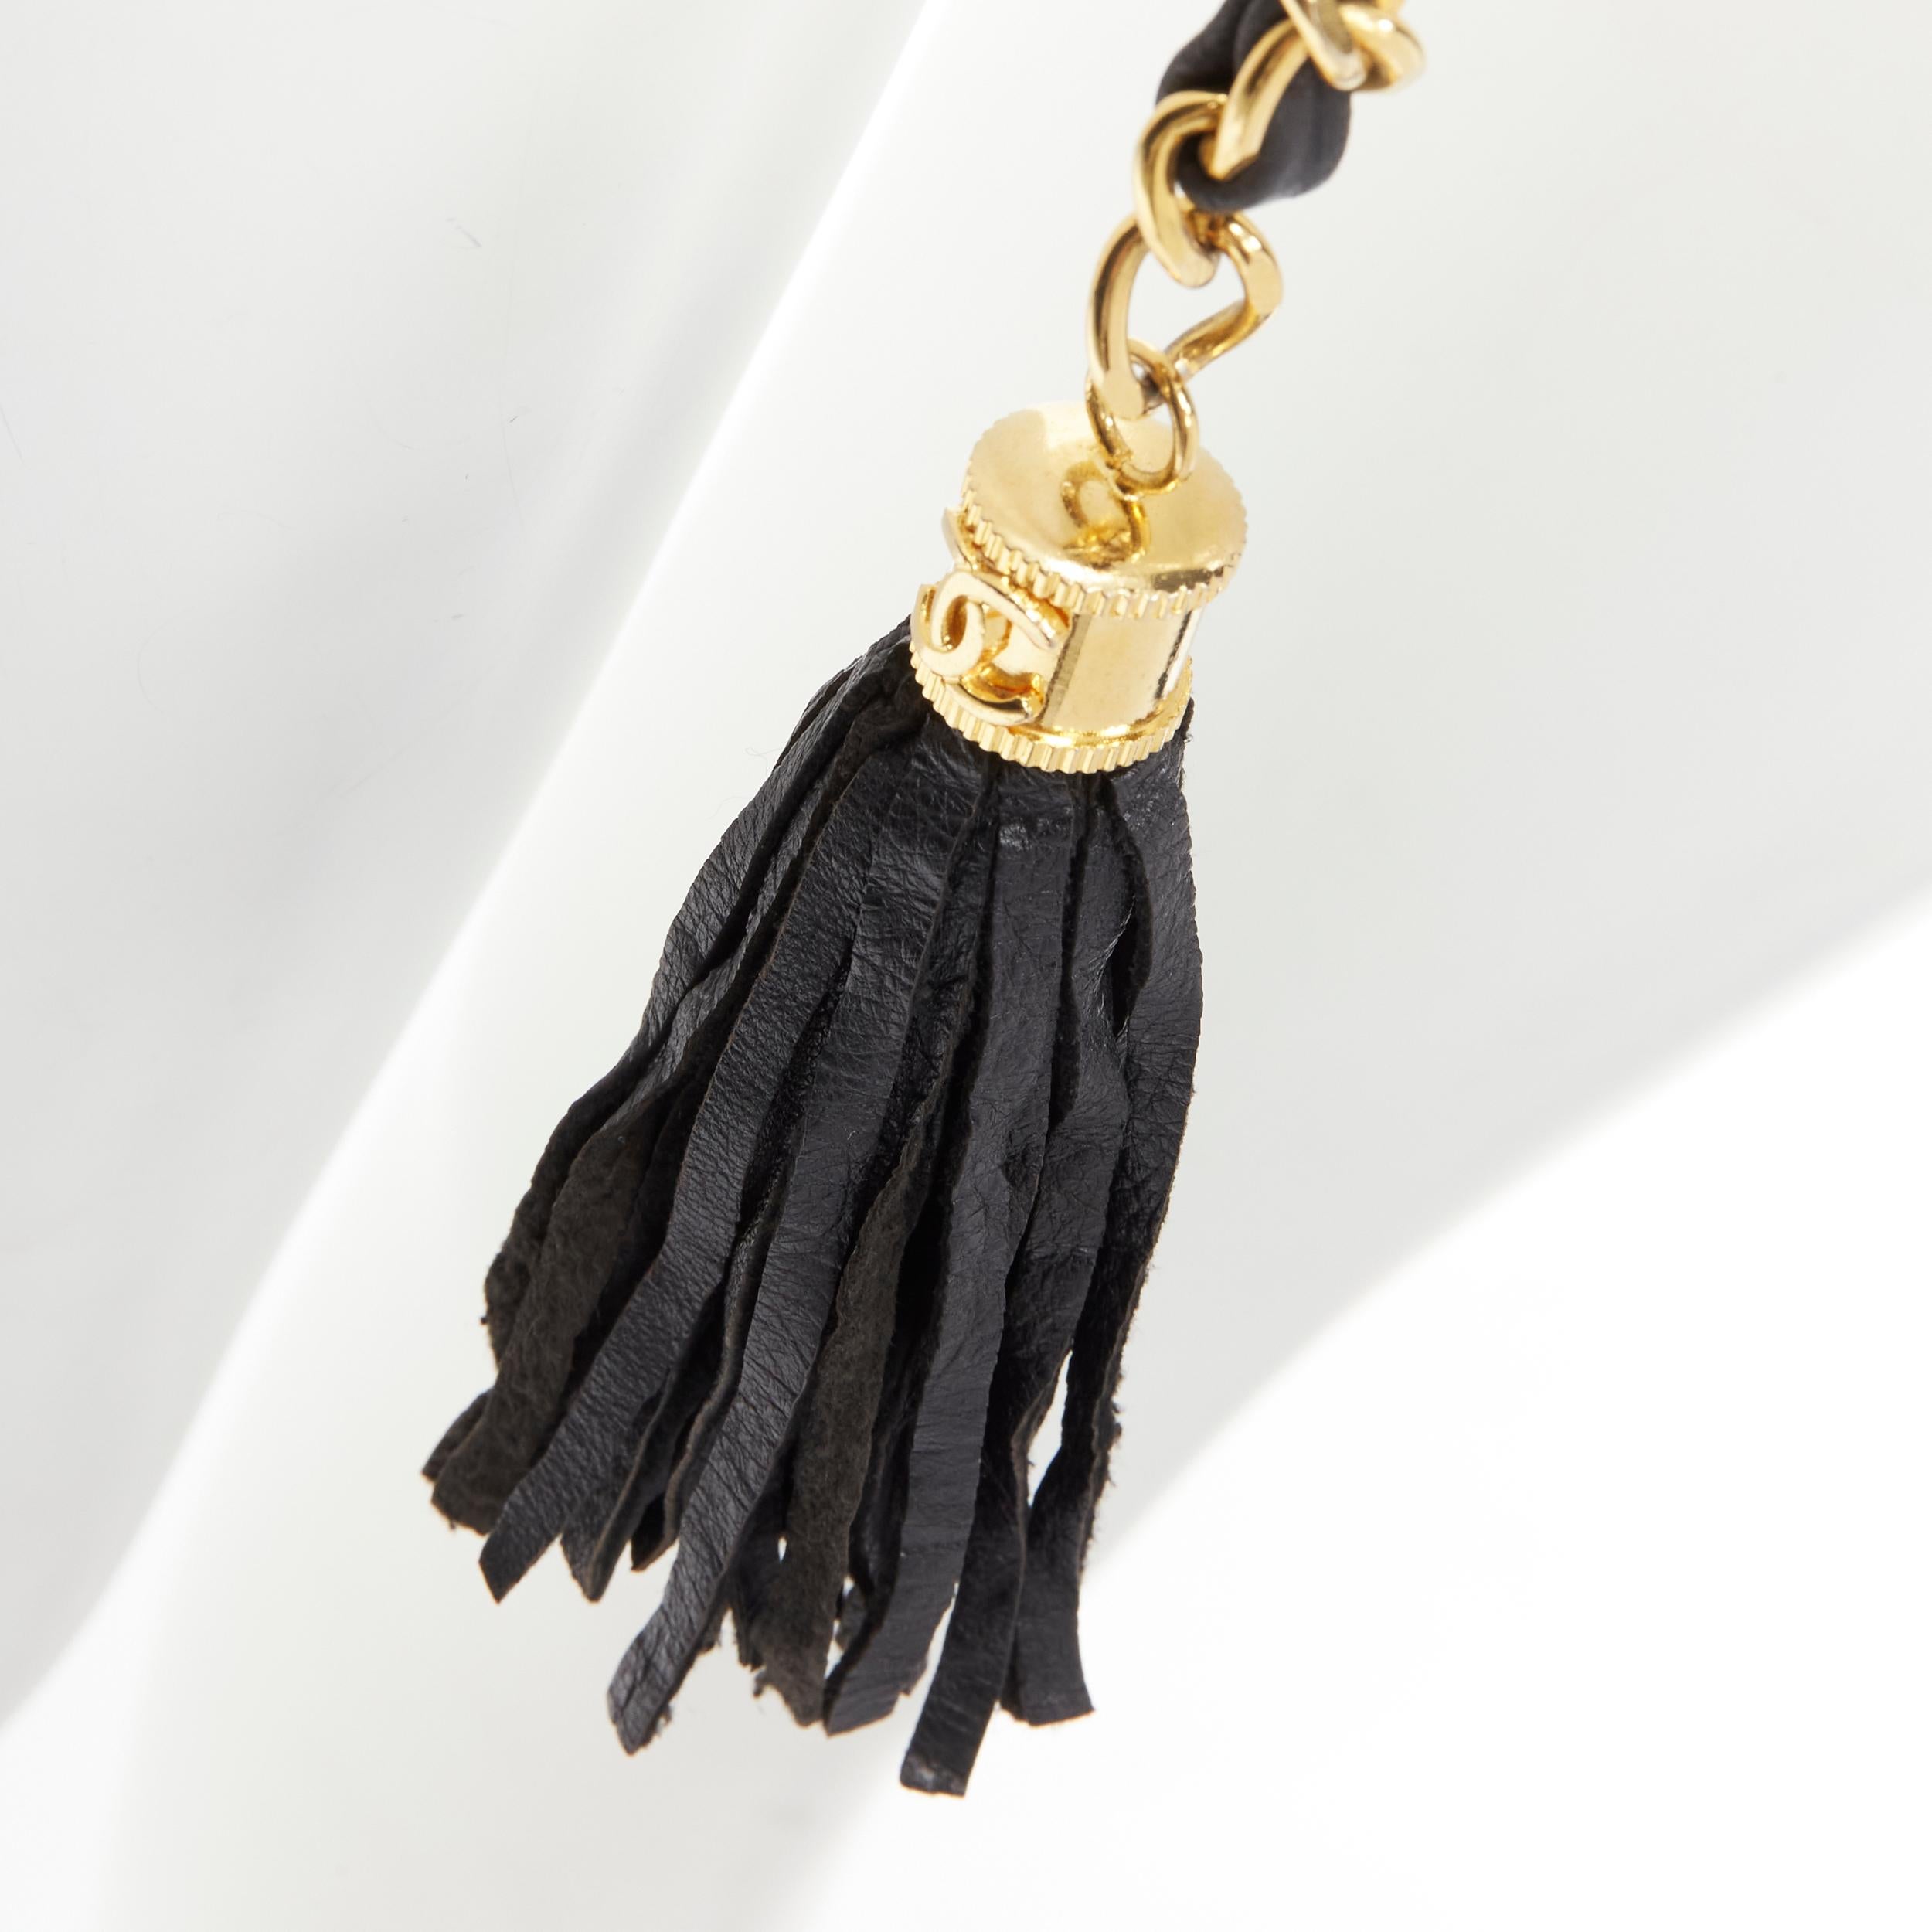 CHANEL 1990's Vintage gold chain leather interwoven link tassel charm belt
Brand: Chanel
Designer: Karl Lagerfeld
Collection: 1990's 
Material: Metal
Color: Gold
Pattern: Solid
Closure: Hook & Eye
Extra Detail: CC logo tassel